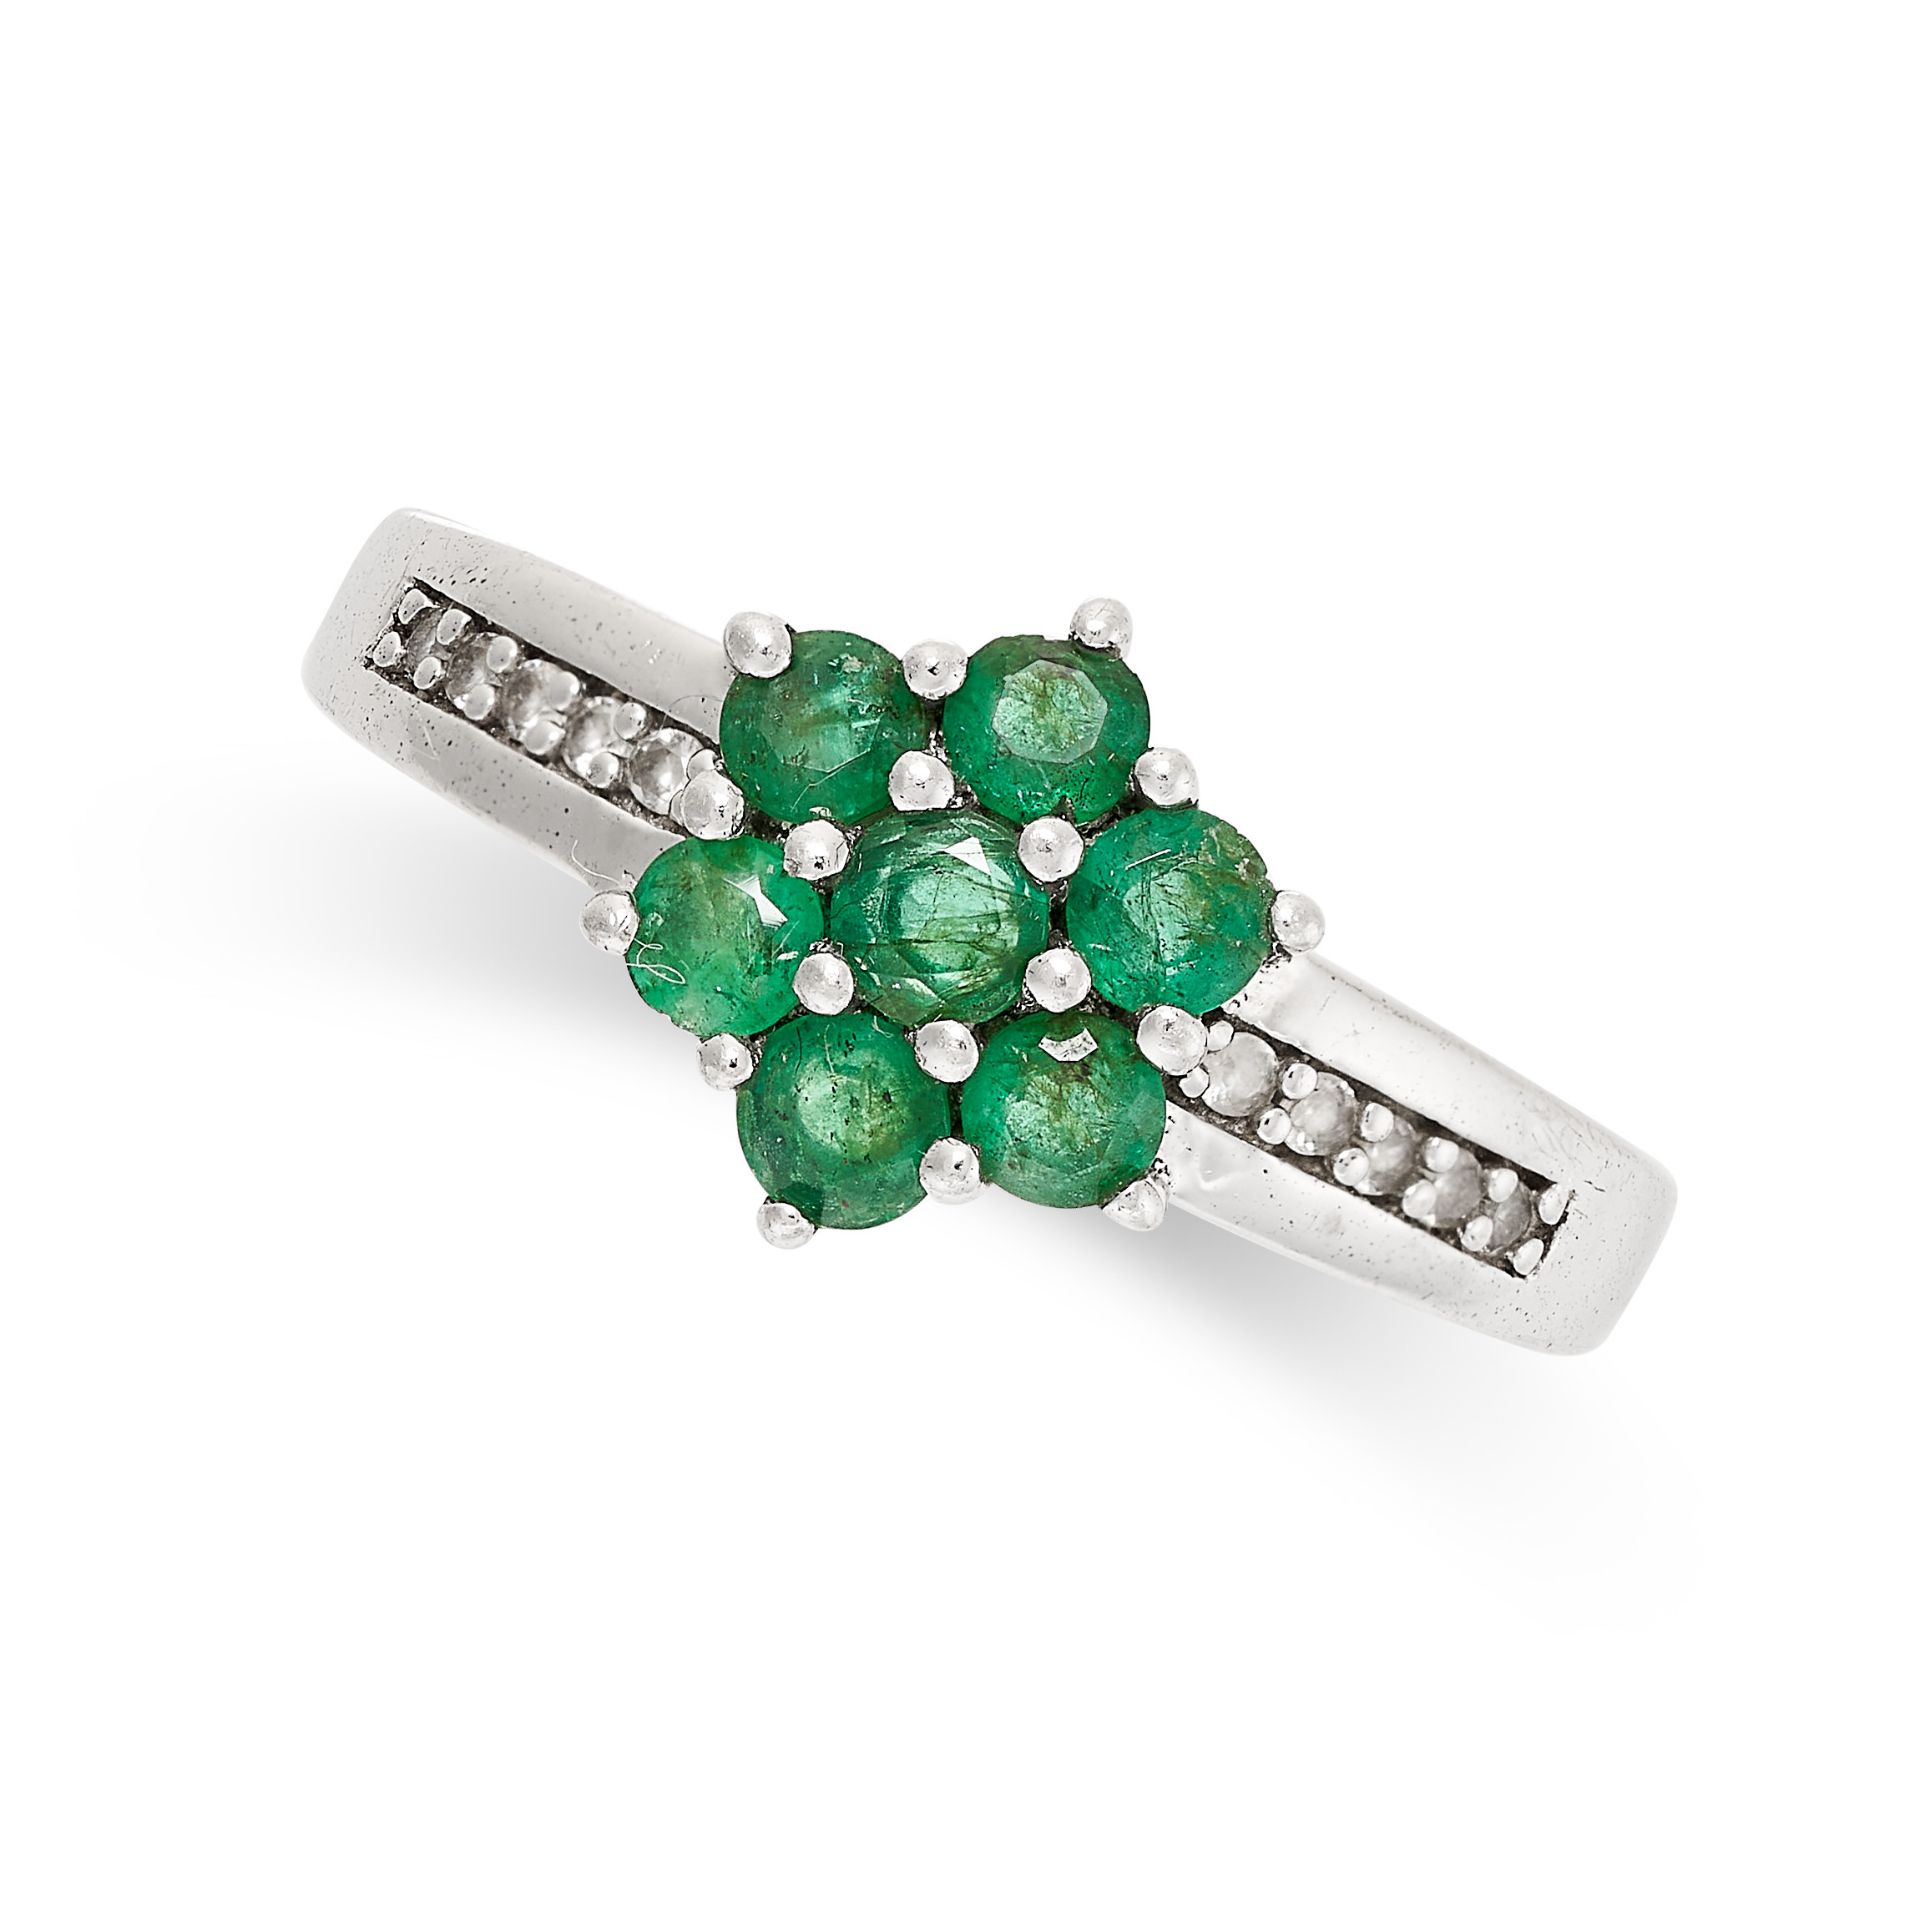 AN EMERALD DRESS RING in sterling silver, set with a cluster of round cut emeralds, accented by rows